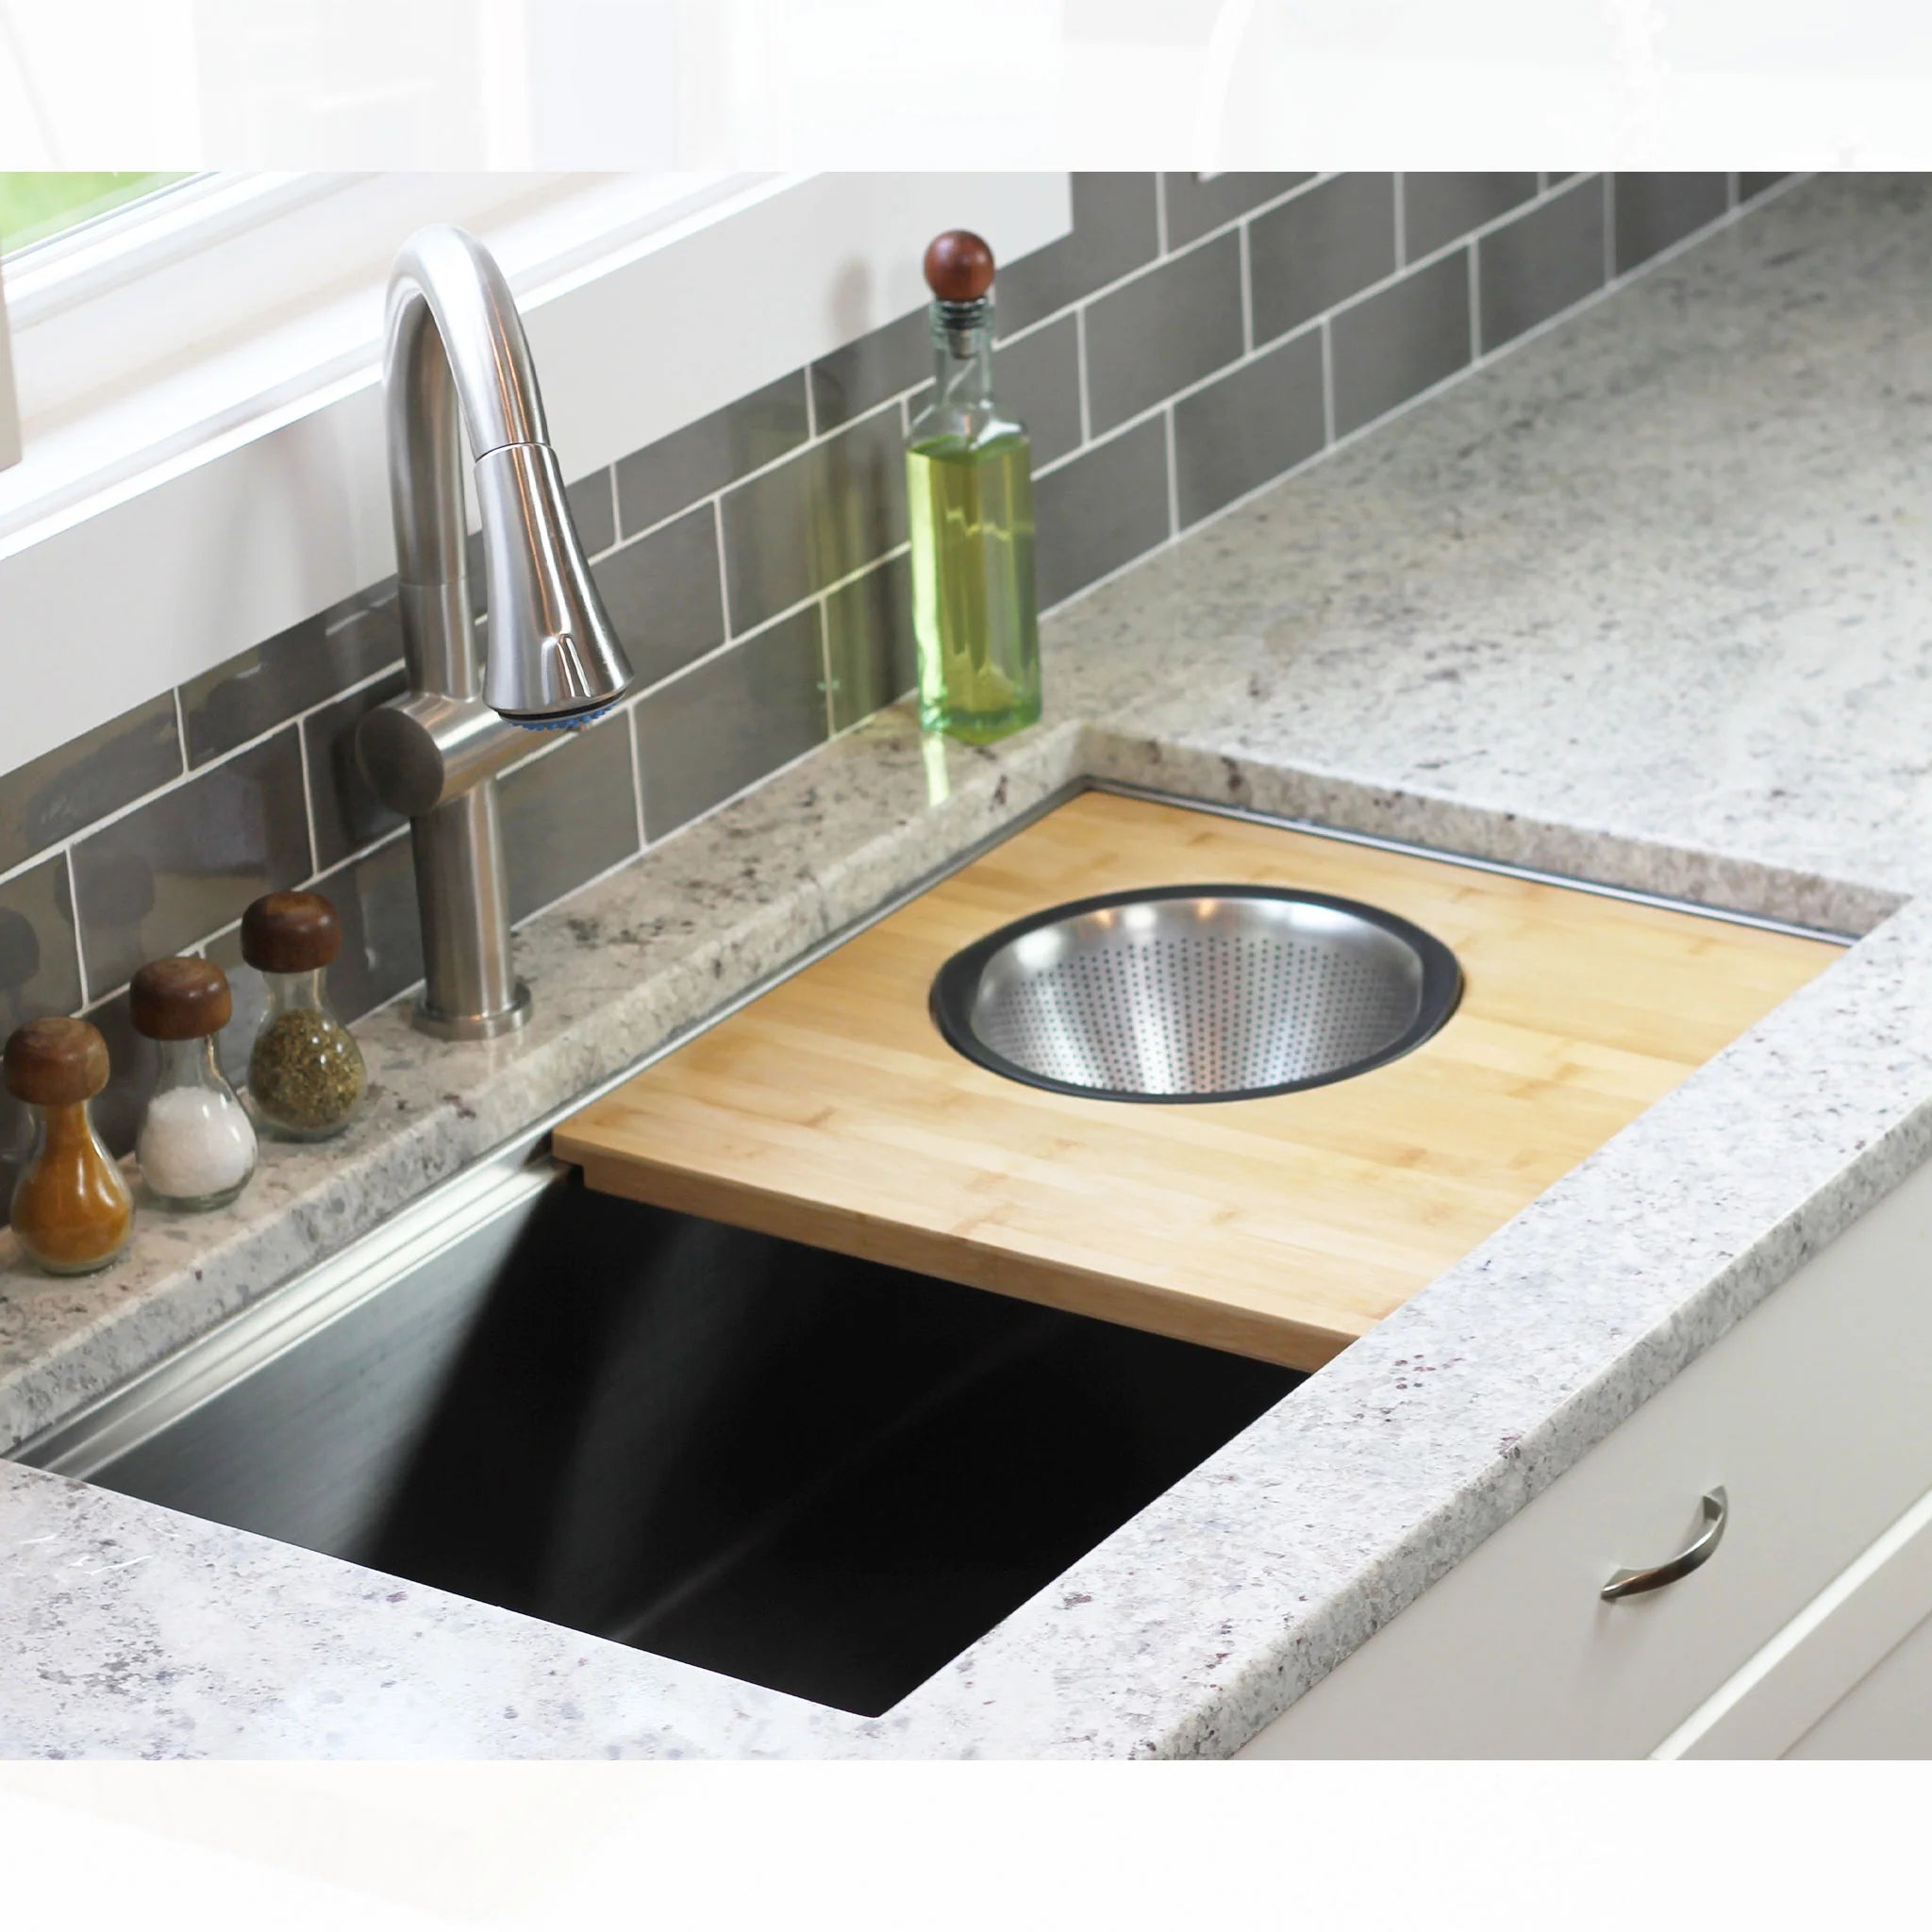 33 inch single basin stainless steel undermount kitchen sink. Workstation sink design with colander and cutting board accessory. Installed in quartz counters